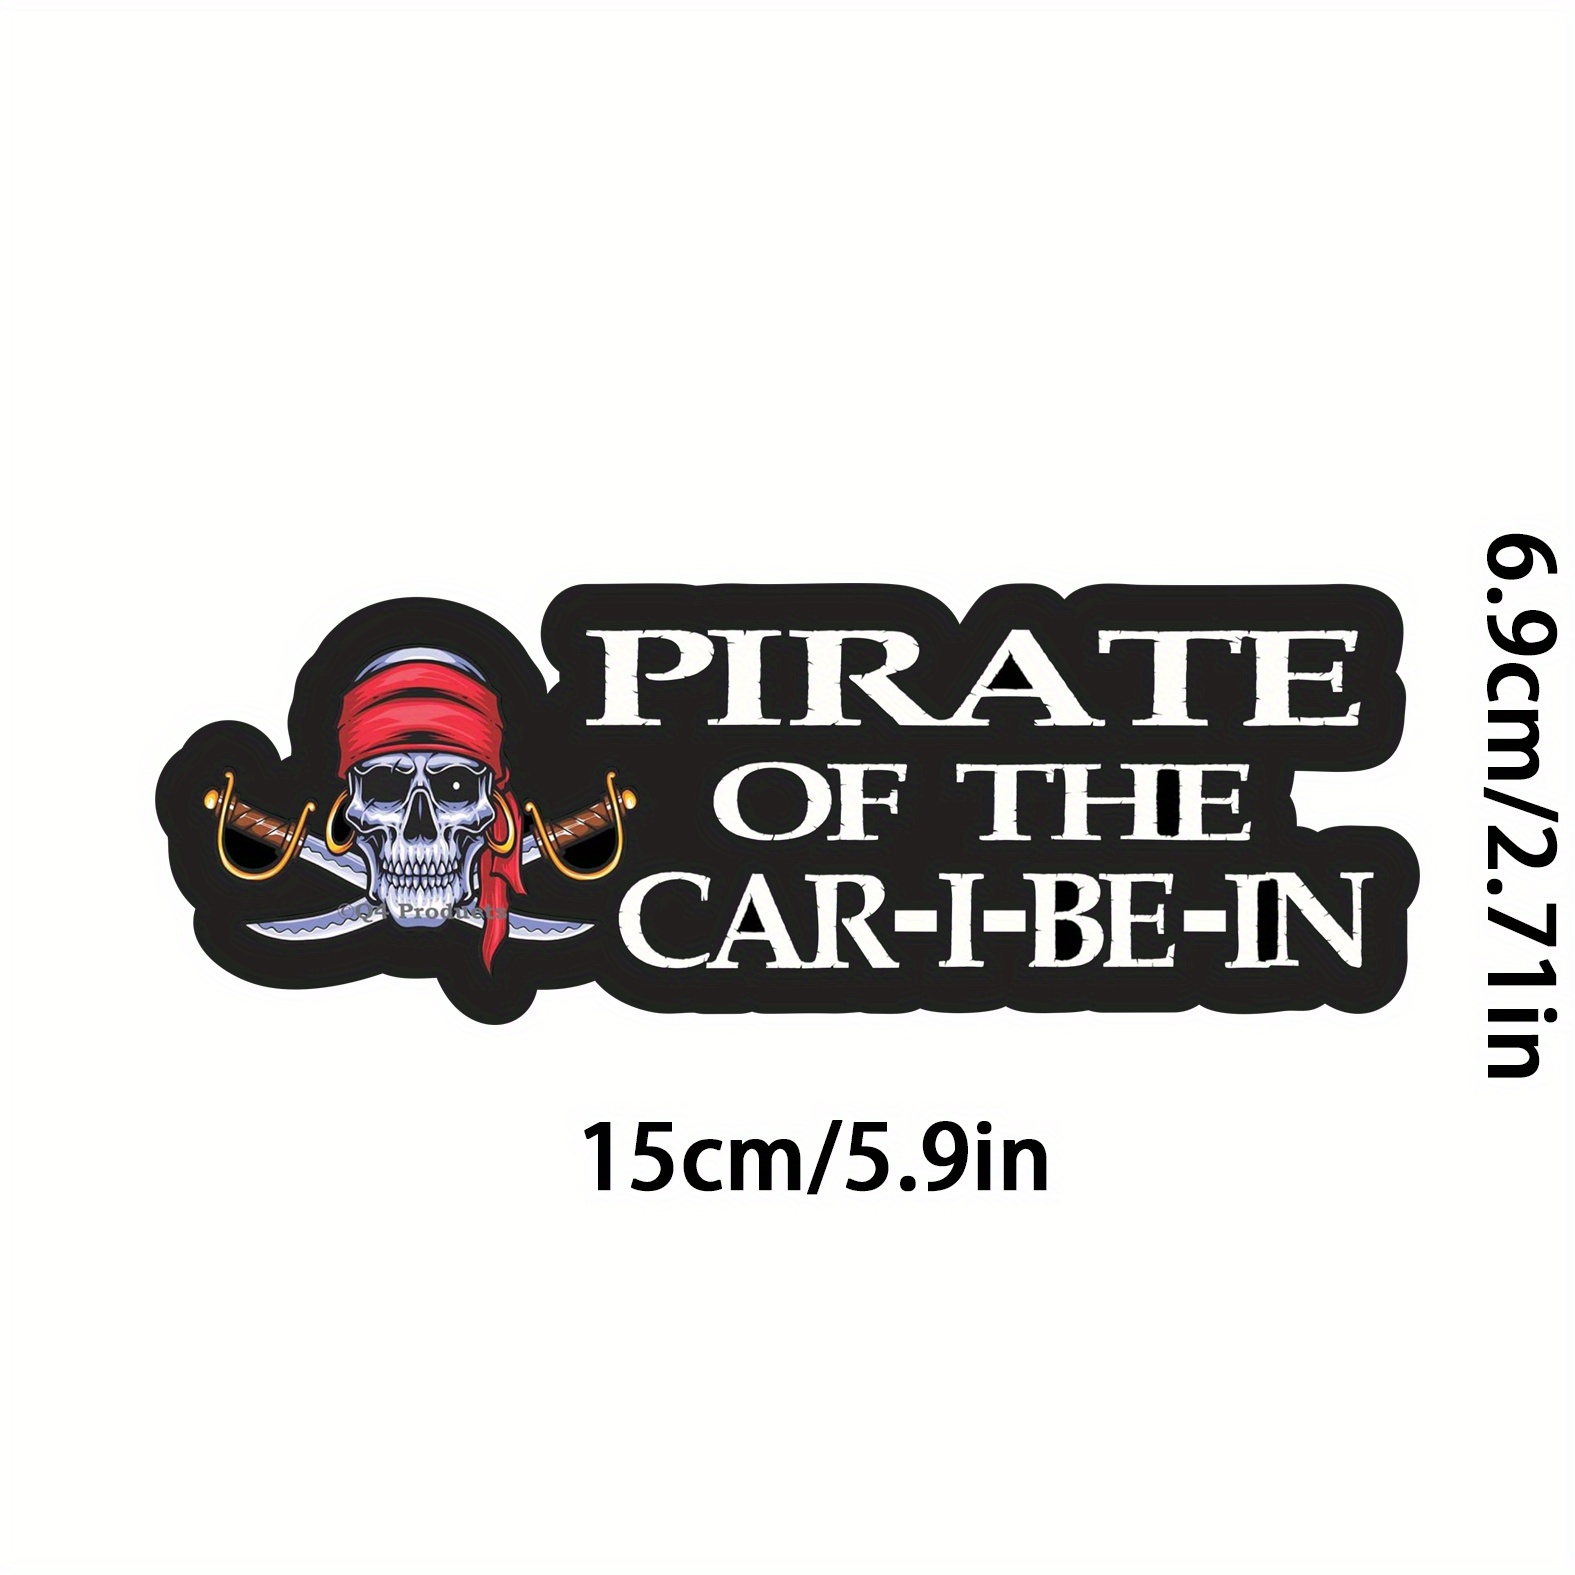 

1pc Car Pirate - Fun Sticker Vinyl Waterproof Stickers For The Windows Or Bumpers Of Your Car Or Truck